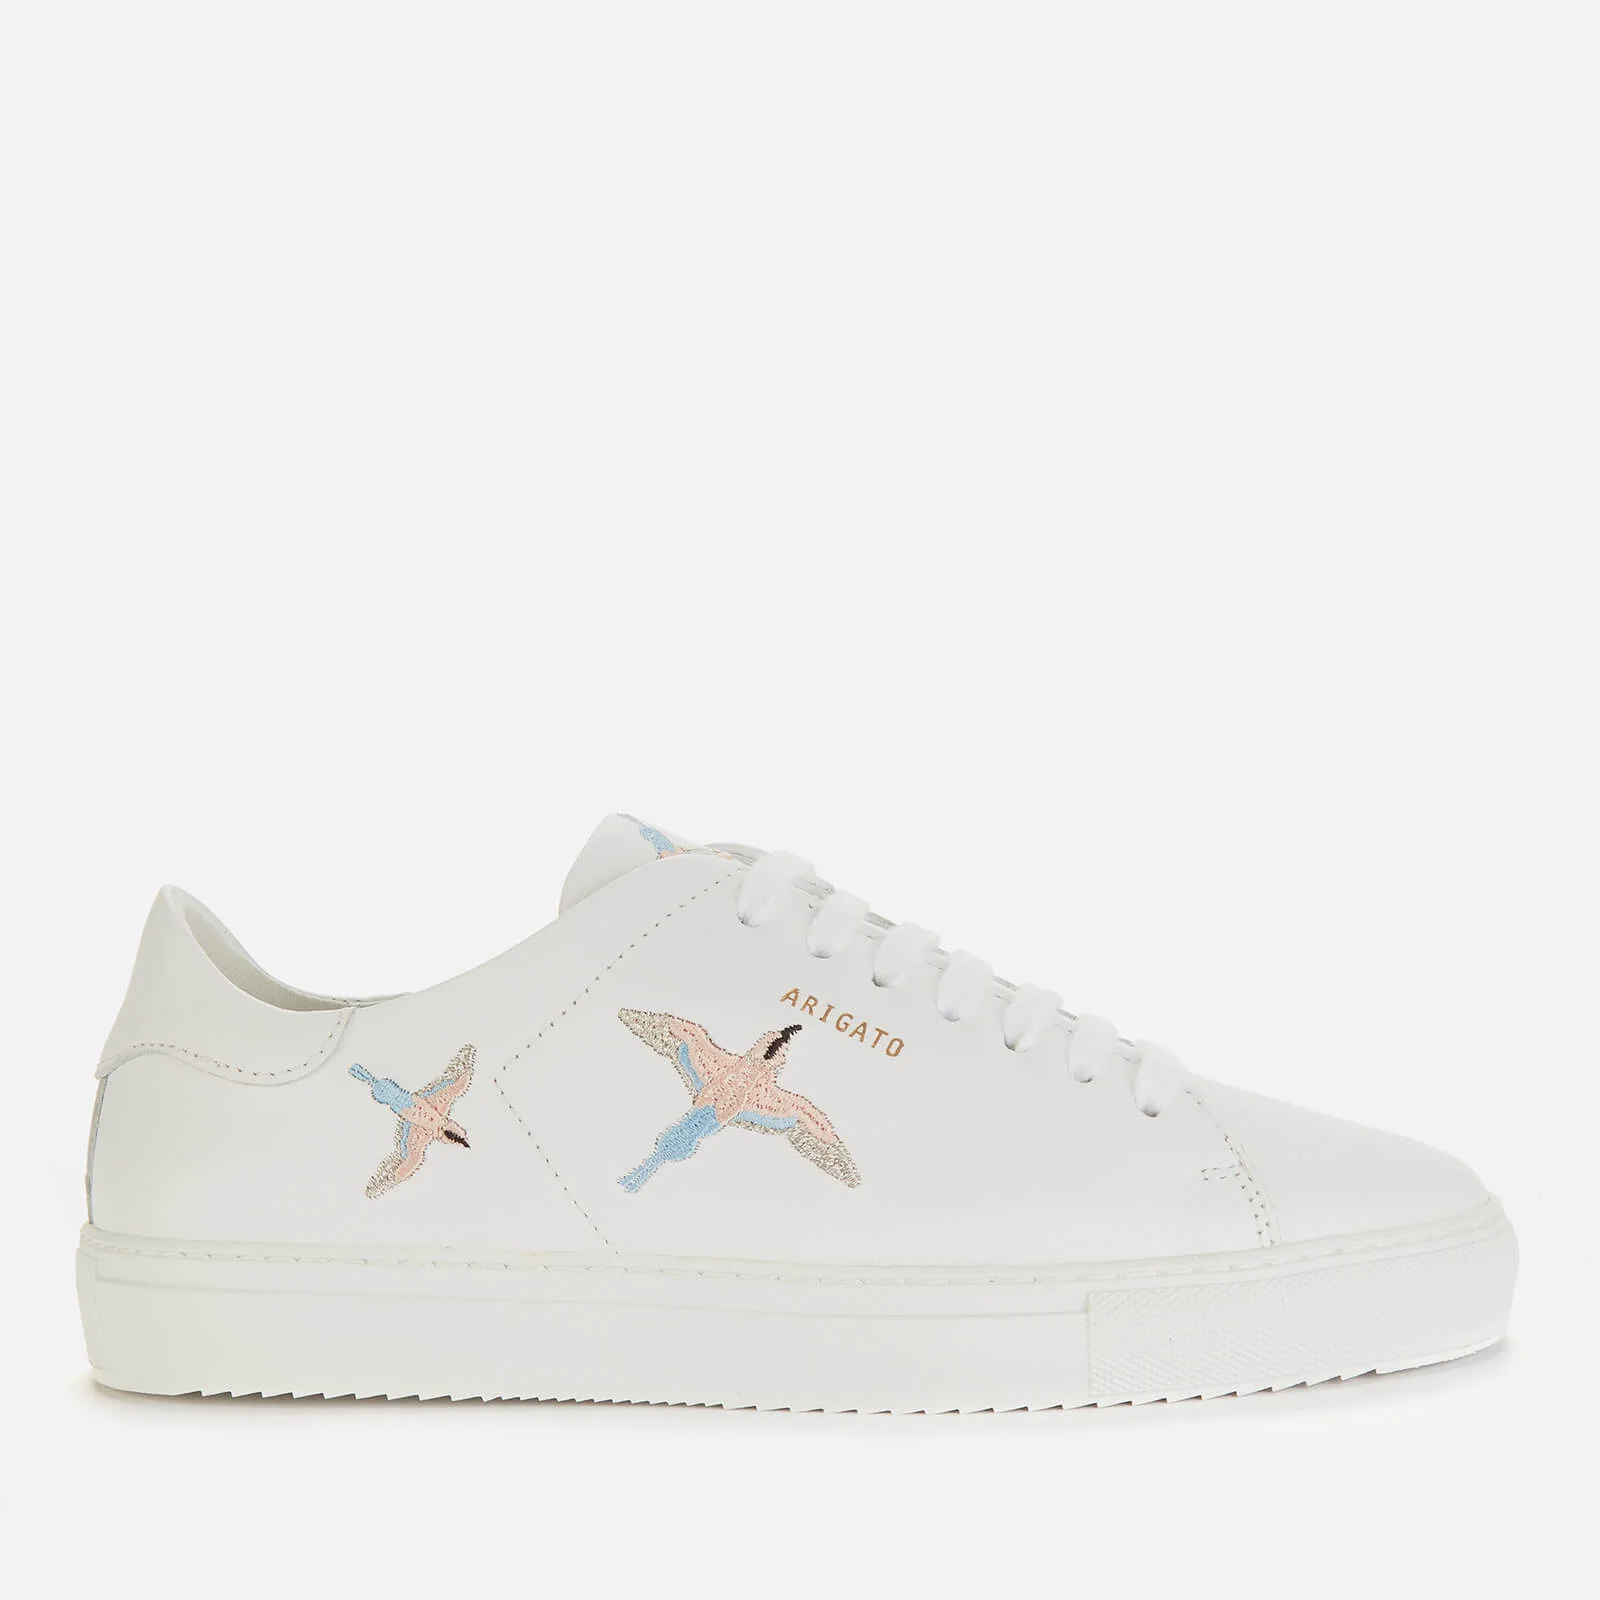 Axel Arigato Women's Clean 90 Bird Leather Cupsole Trainers - White/Blue/Pink Image 1